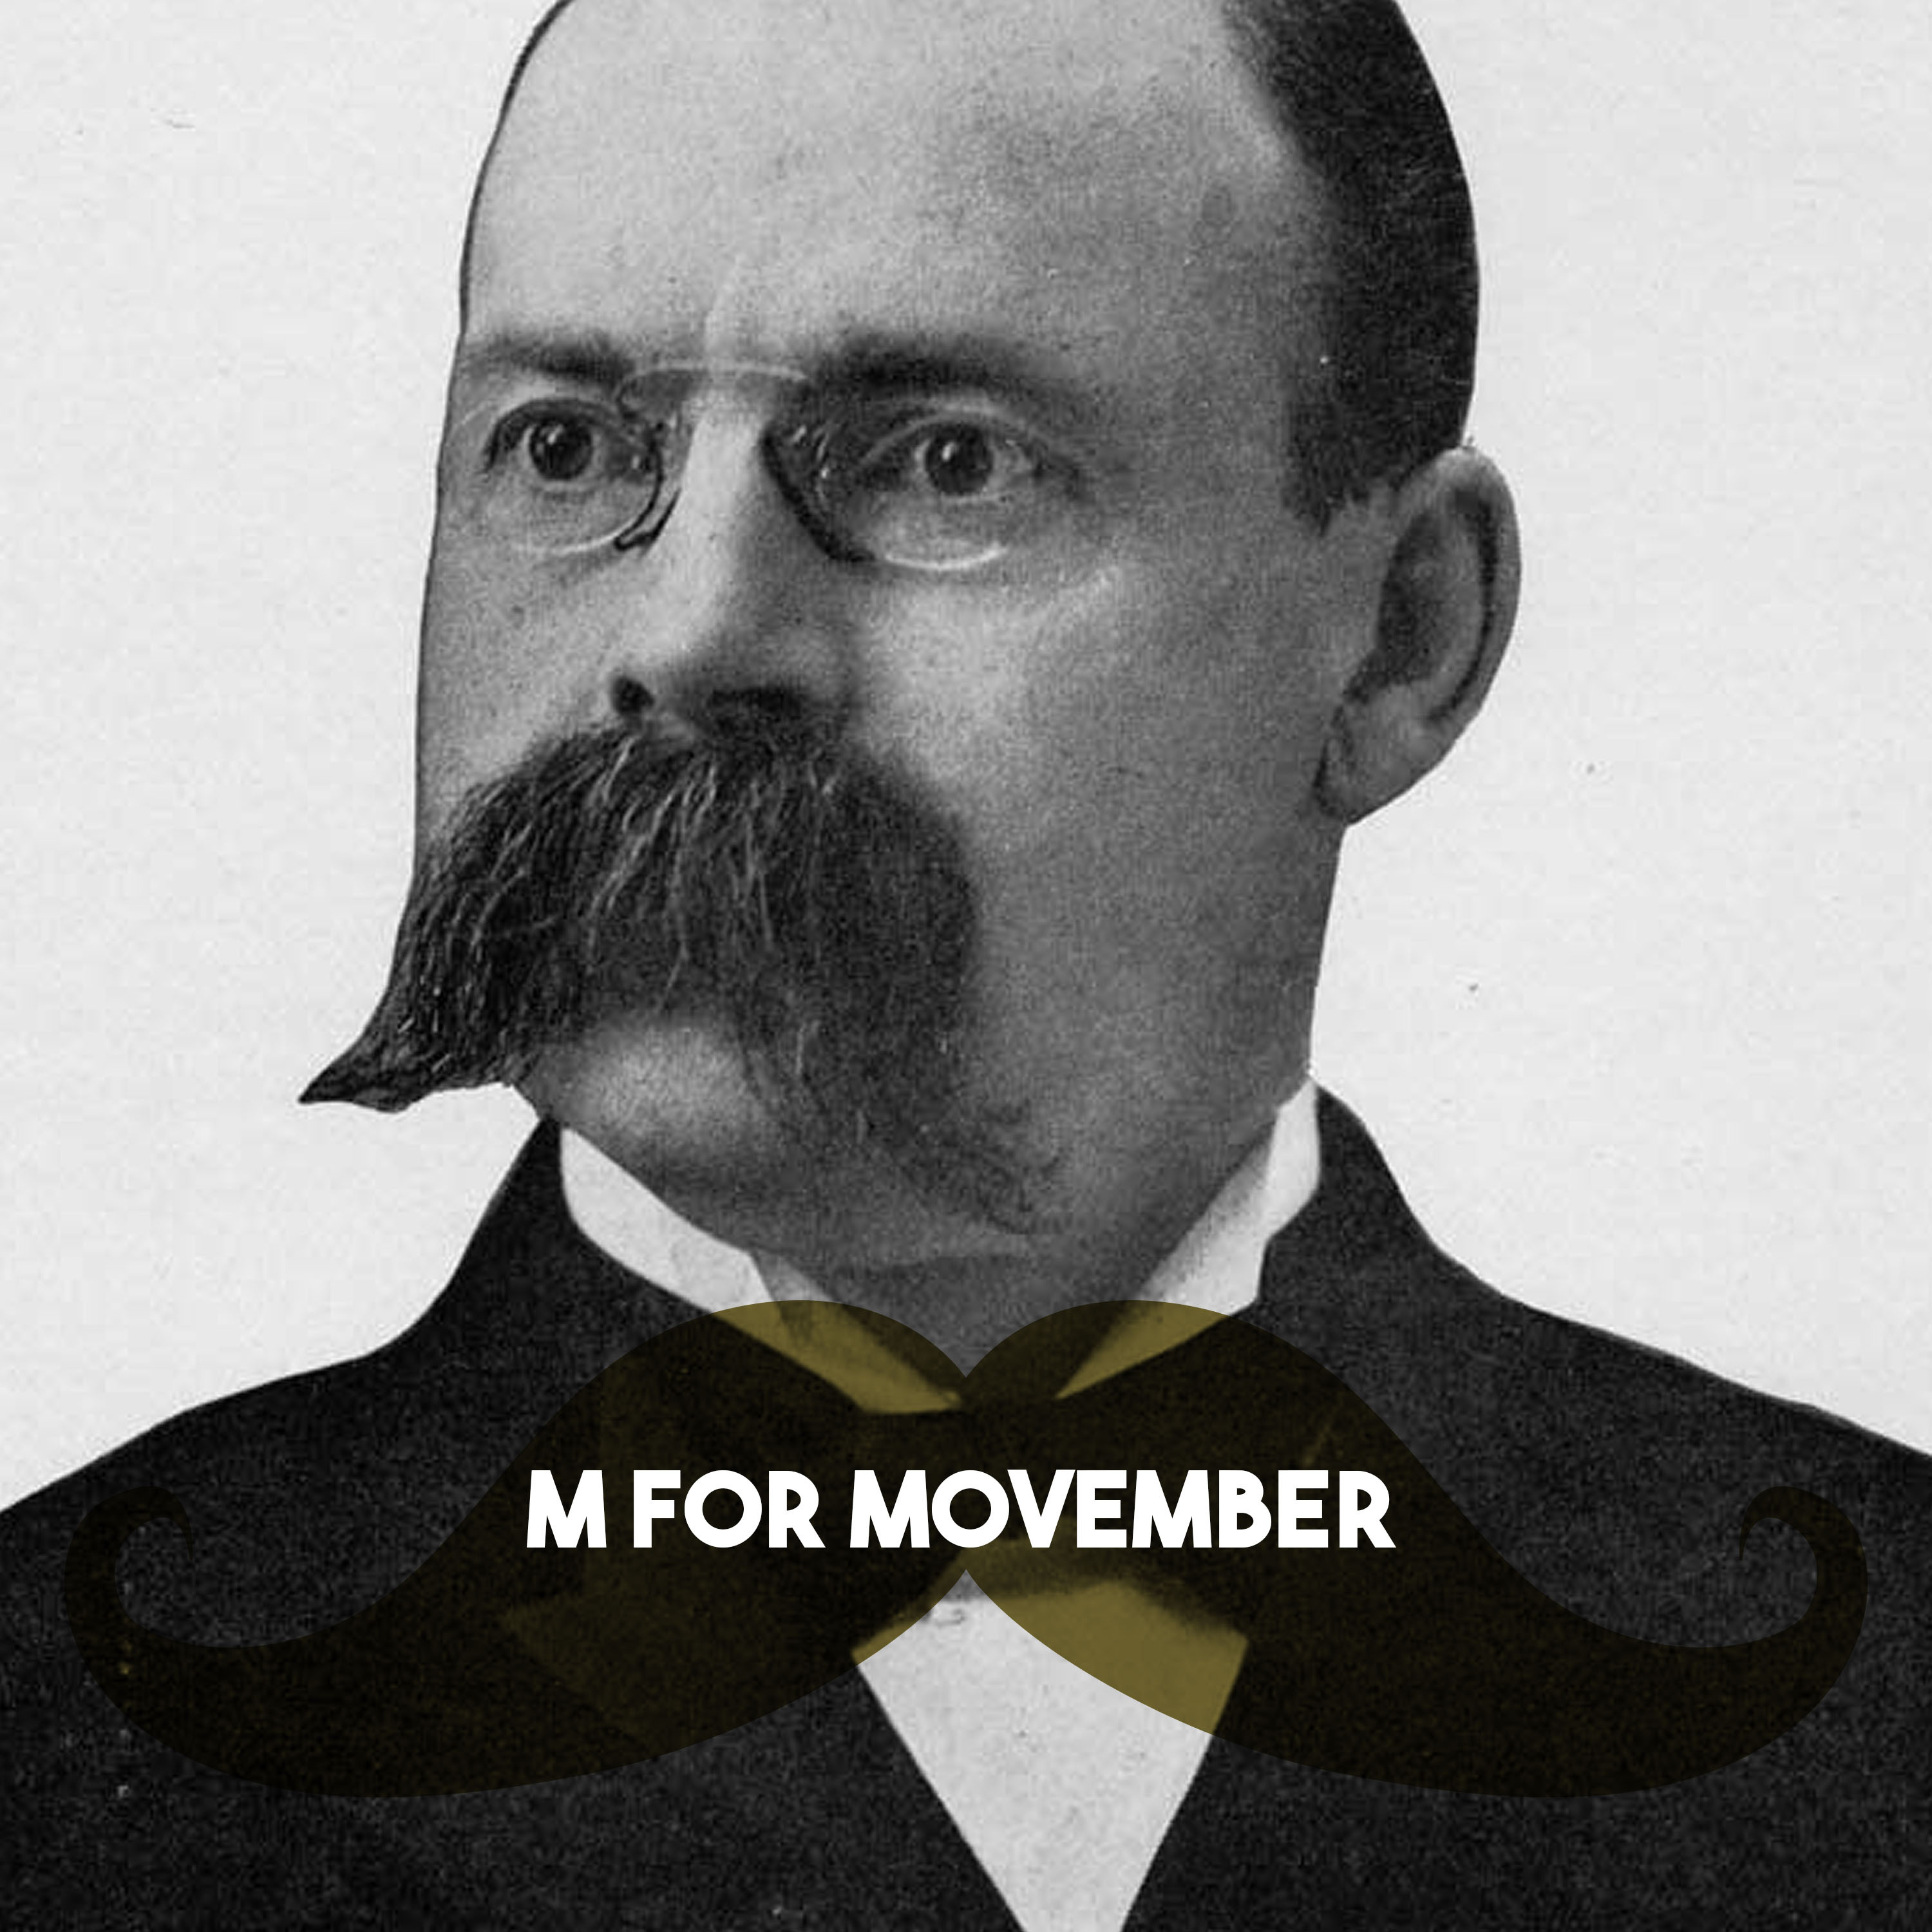 M for Movember